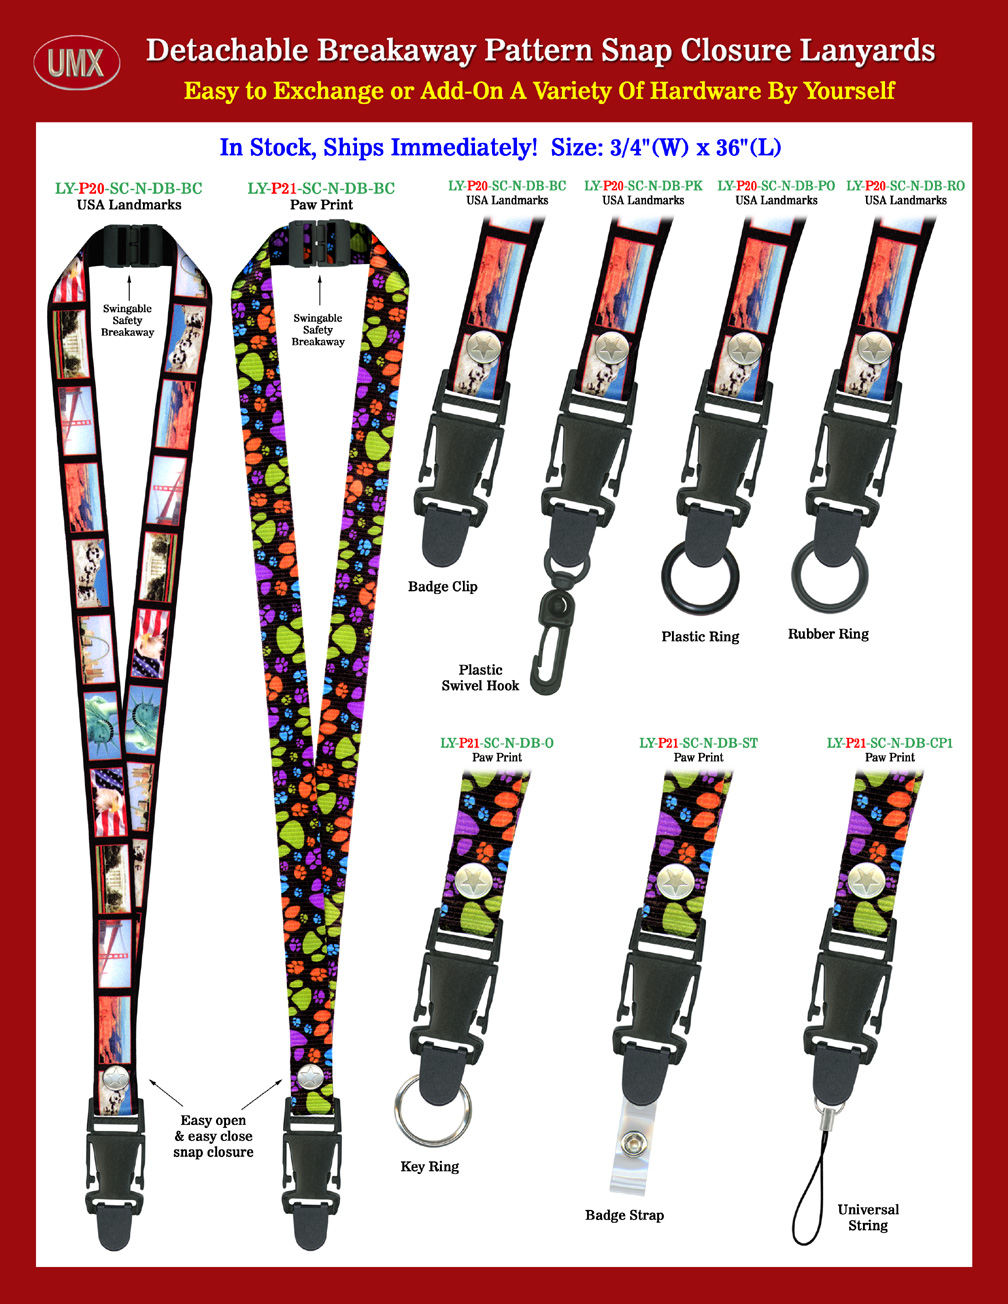 3/4" Snap Closure Lanyards With Printed Famous USA Landmarks and Paw Prints.